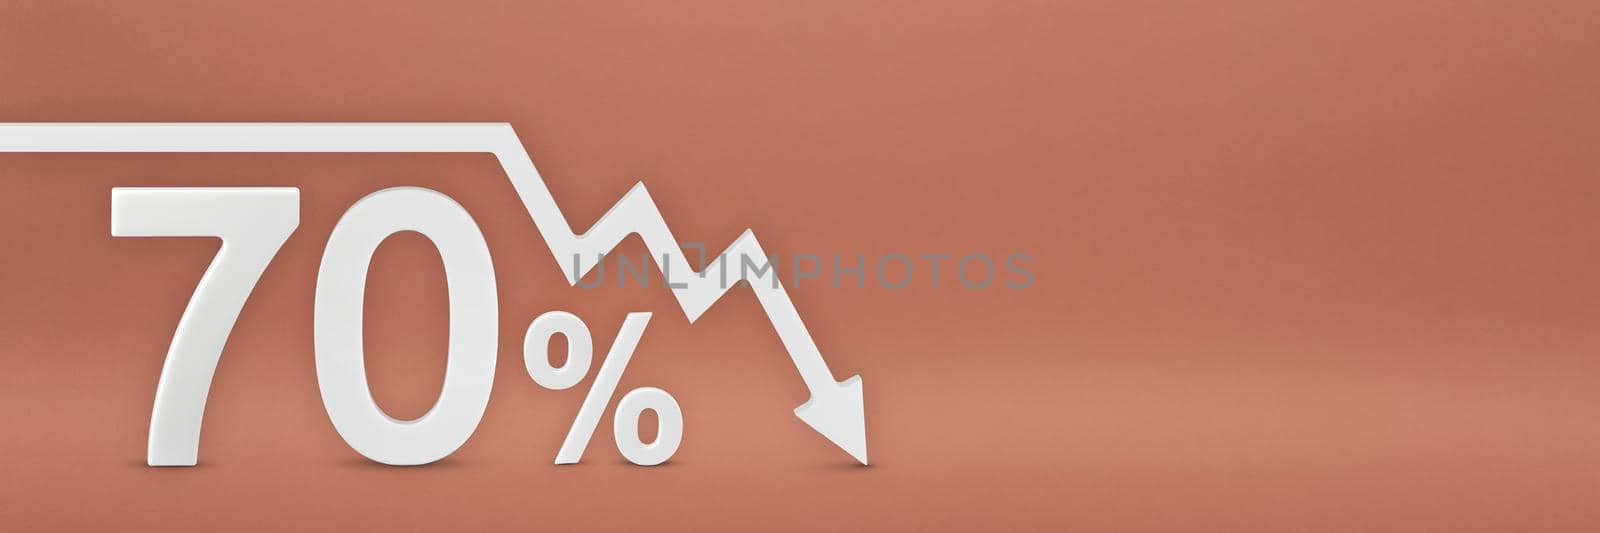 seventy percent, the arrow on the graph is pointing down. Stock market crash, bear market, inflation.Economic collapse, collapse of stocks.3d banner,70 percent discount sign on a red background. by SERSOL